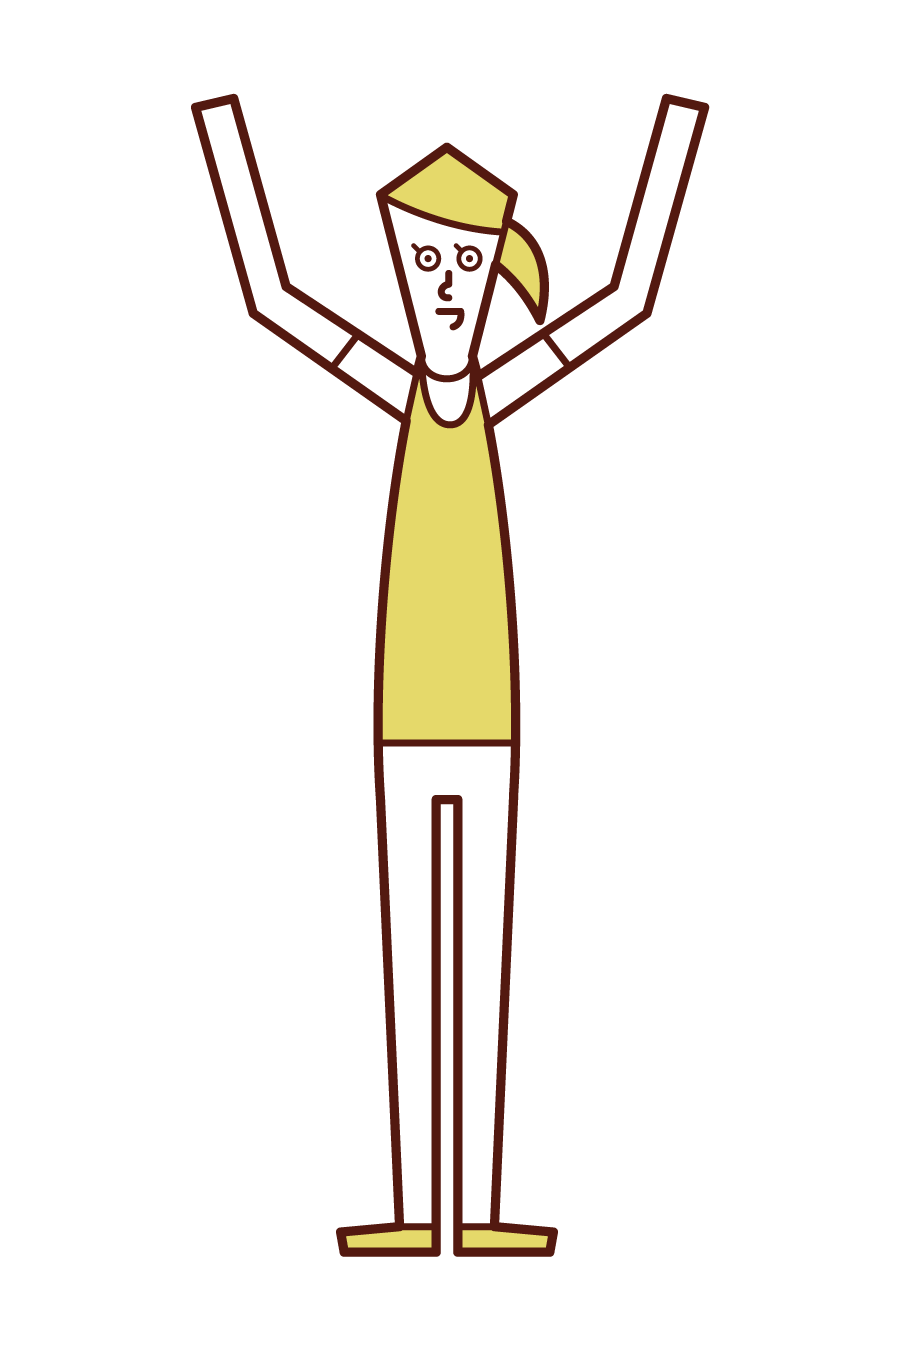 Illustration of a woman who is happy to win a match